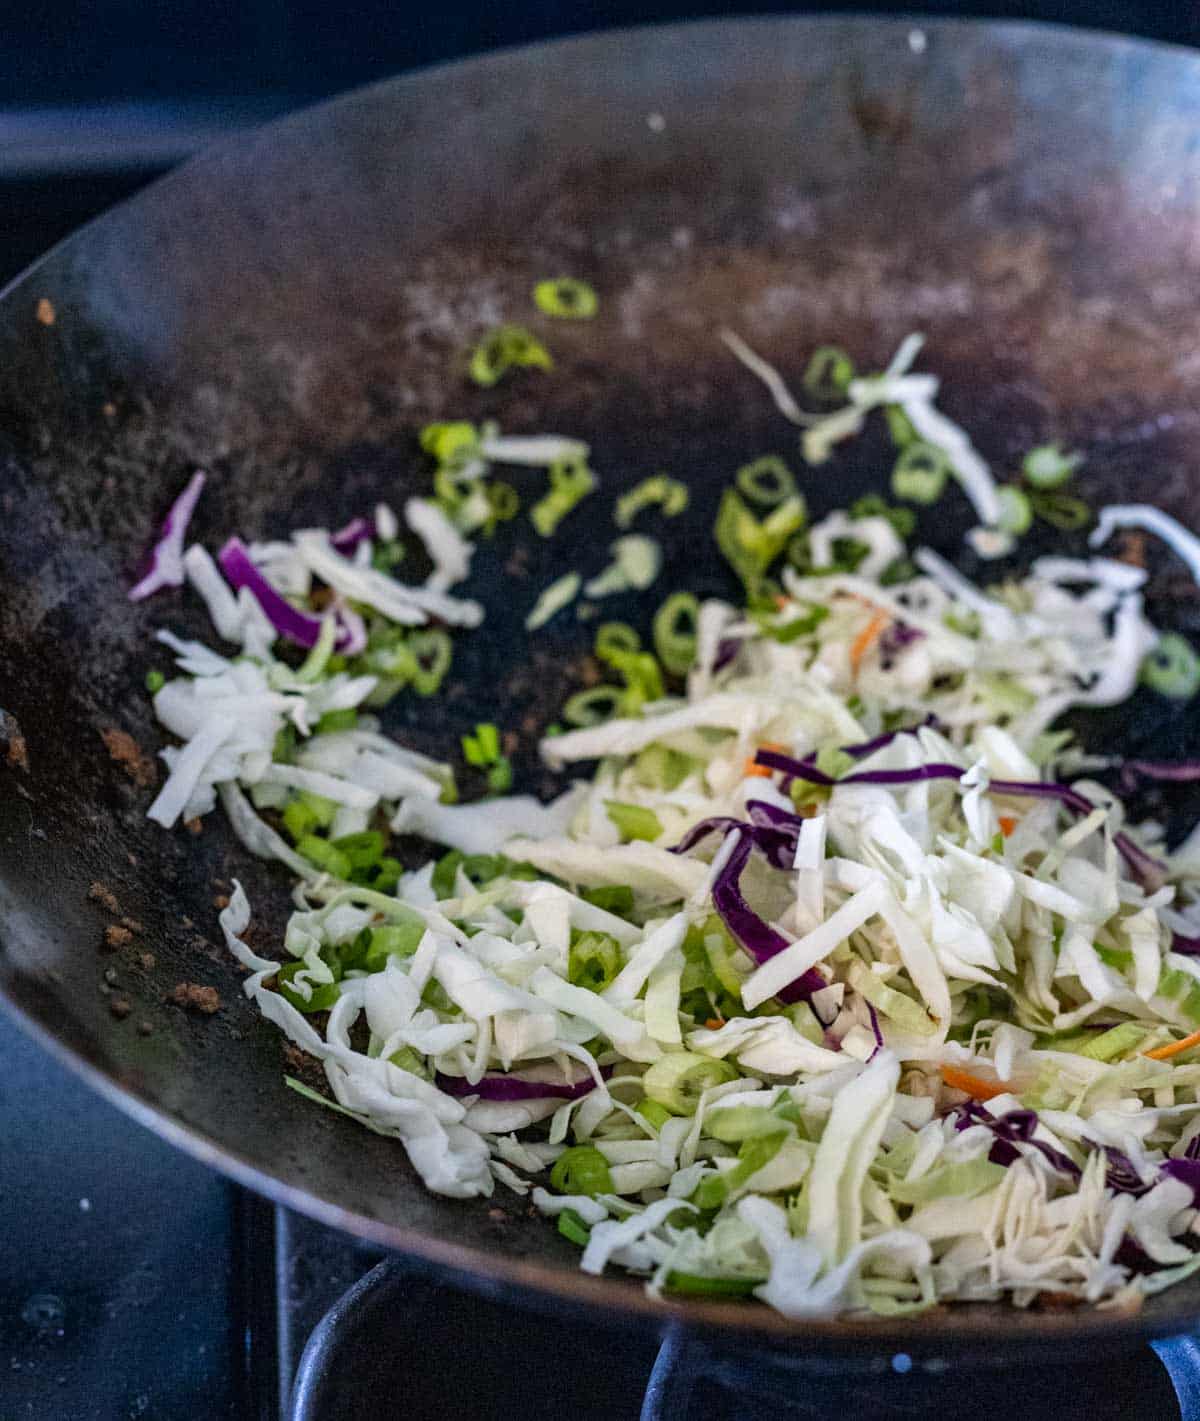 Shredded cabbage in a wok on the stovetop.